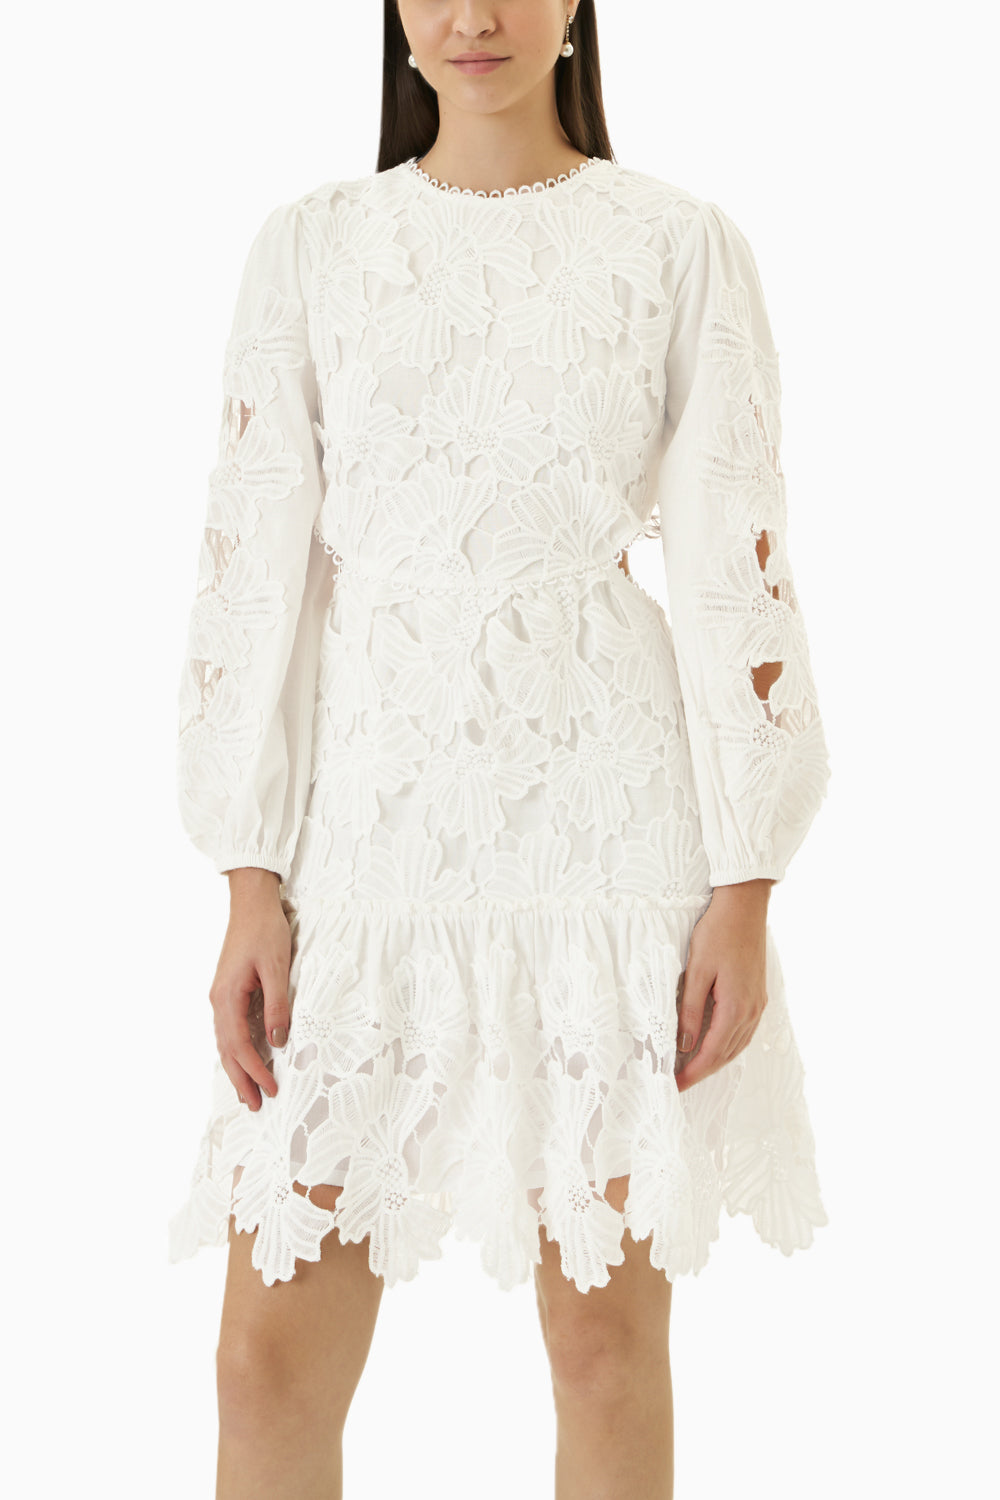 The Sommerset Lace Dress